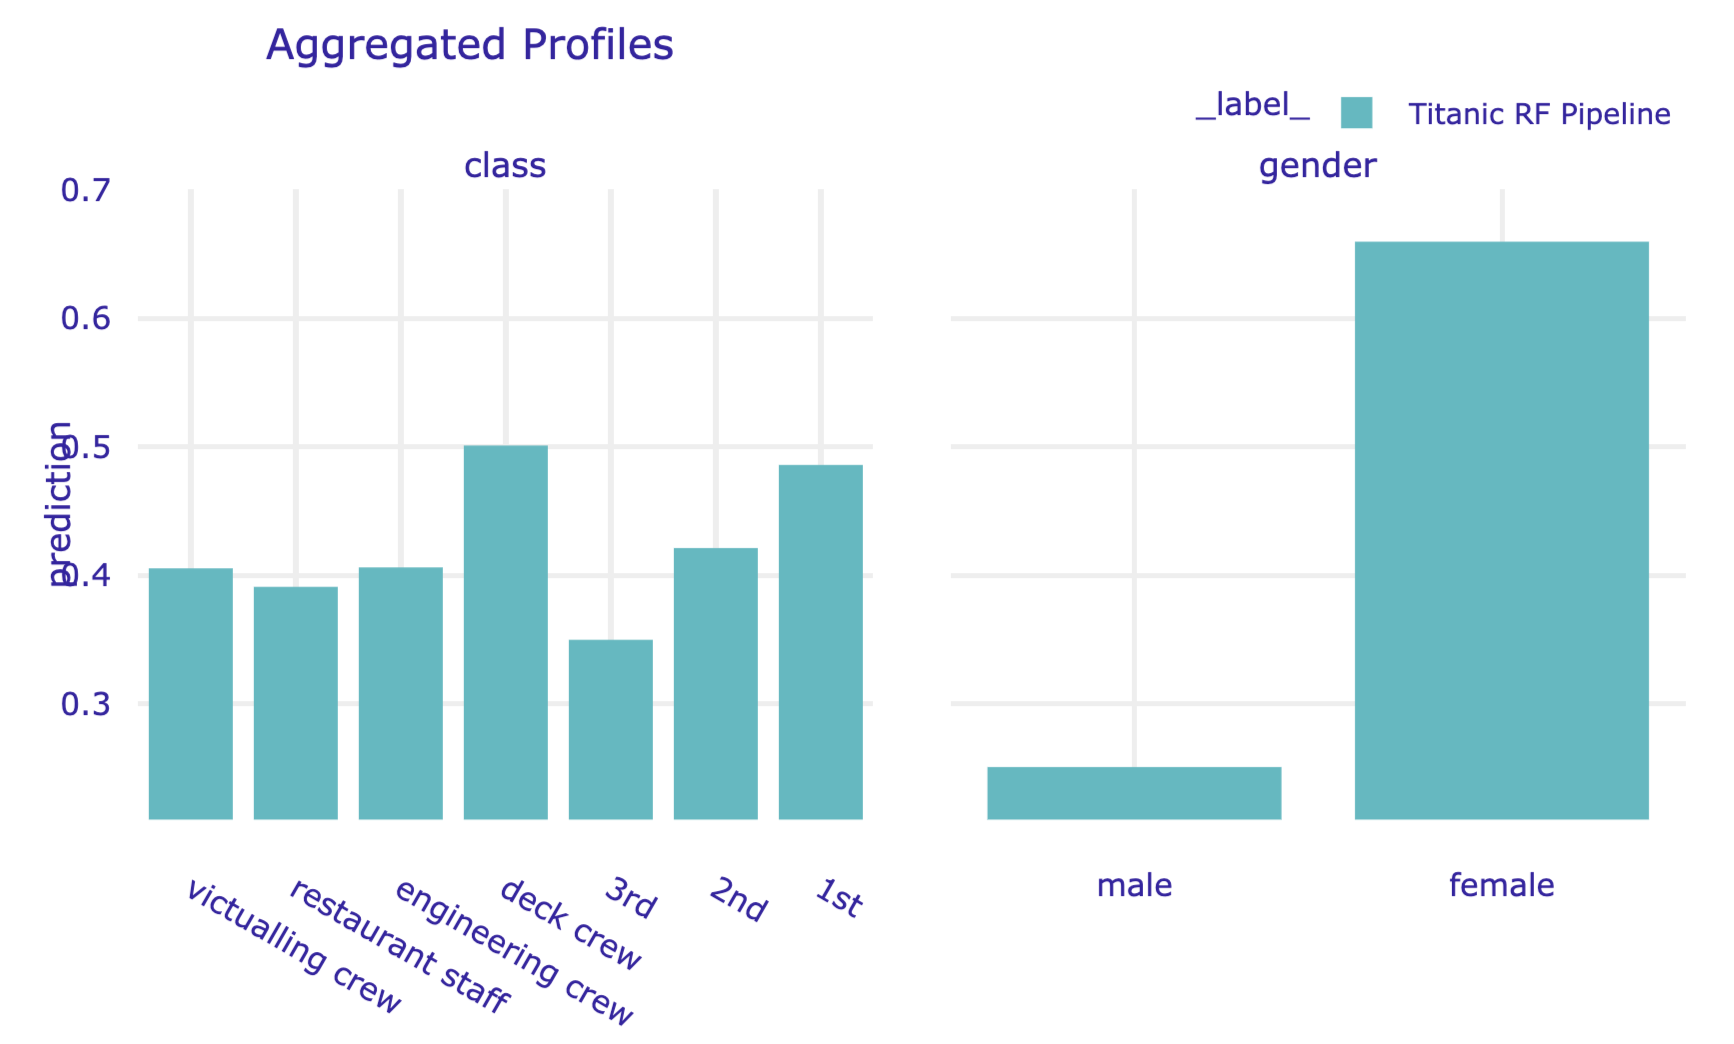 Partial-dependence profiles for class and gender for the random forest model for the Titanic data, obtained by using the plot() method in Python.